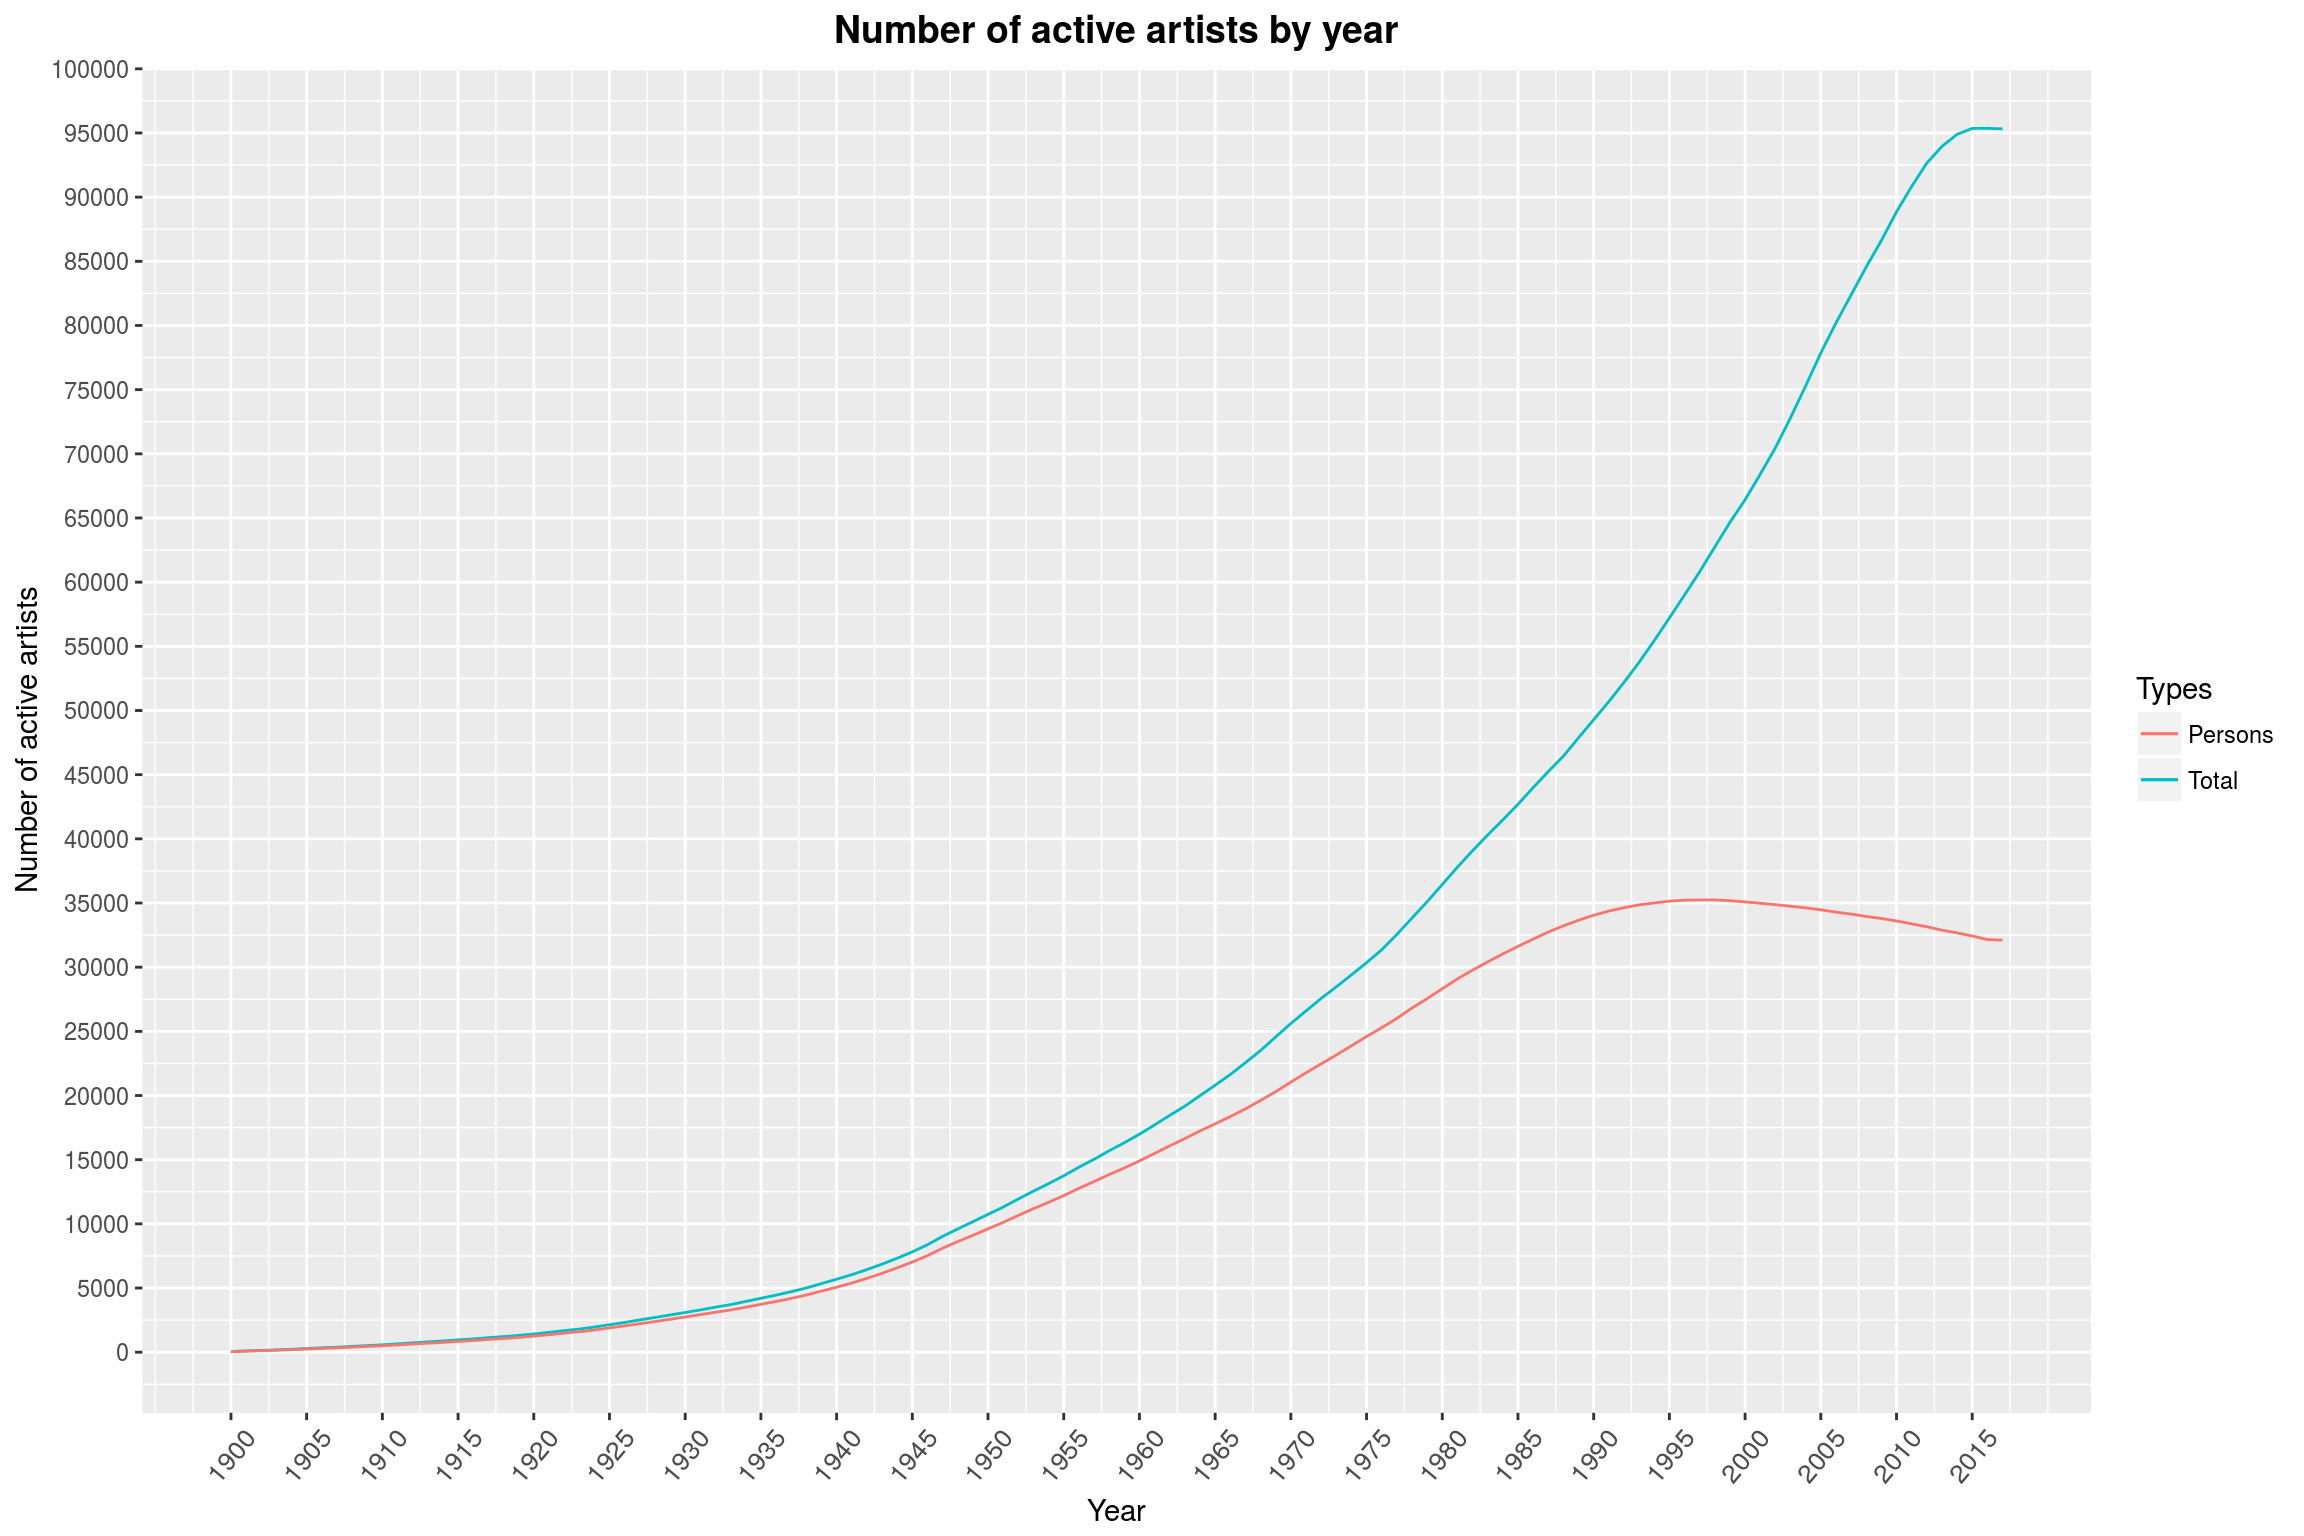 Number of active artists by year